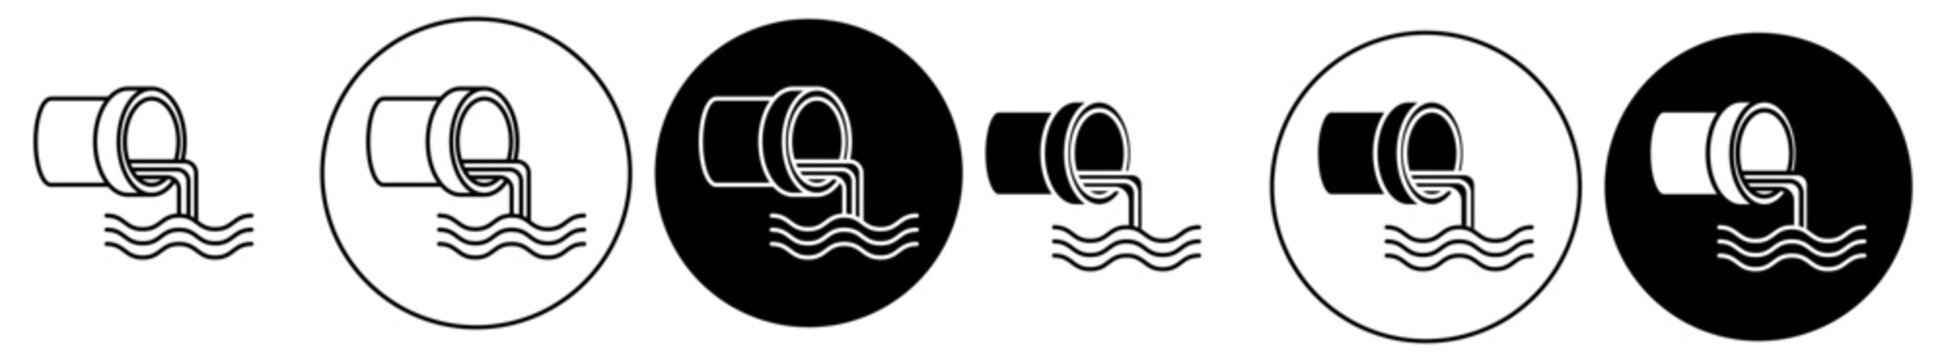 Wastewater icon set. sewage waste pipe vector symbol. plant disposal water drainage sign in black filled and outlined style.